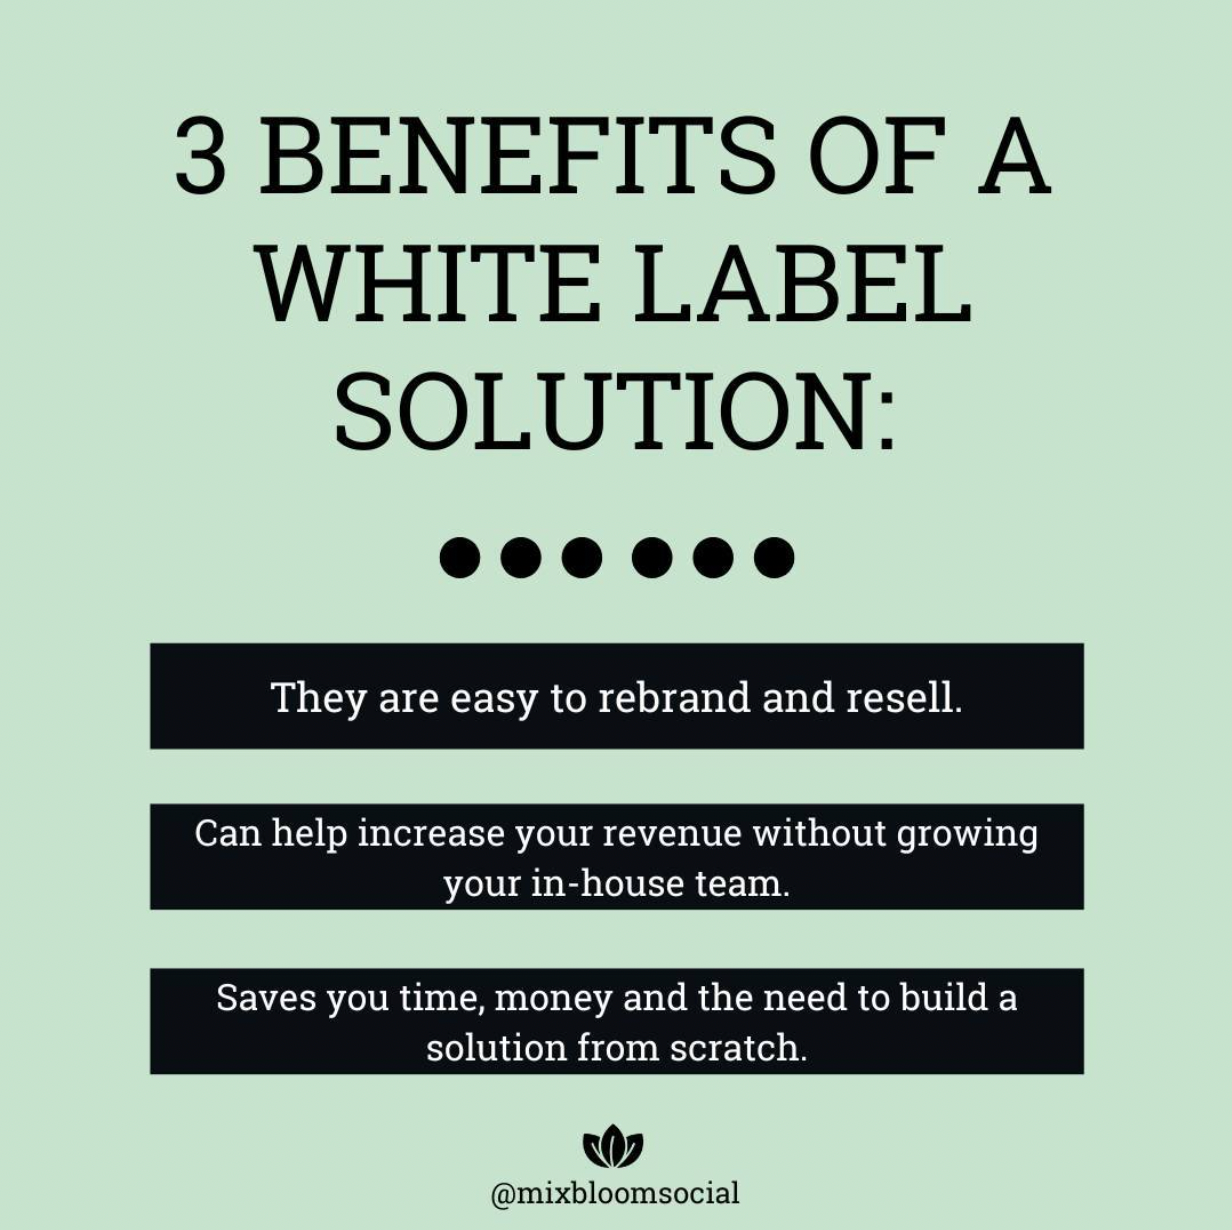 3 benefits of a white label solution: They are easy to rebrand and resell. Can help increase your revenue without growing your in-house team. Saves you time, money and the need to build a solution from scratch.